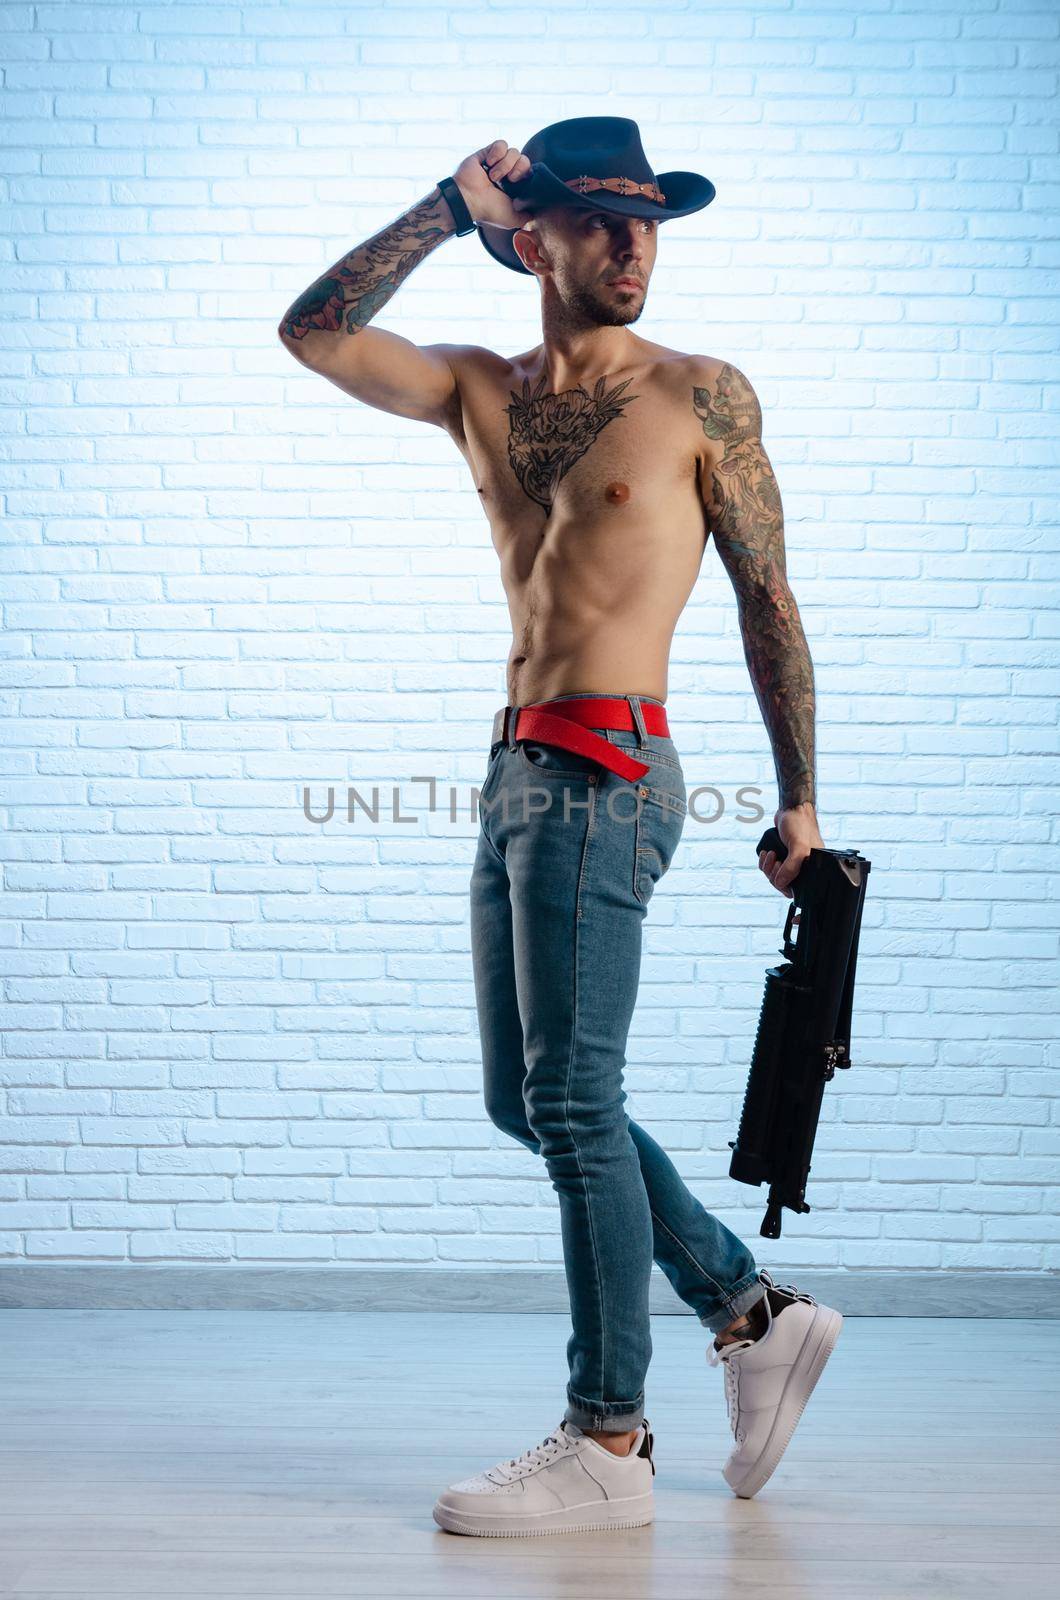 the fashionable slim guy with a bare torso in tattoos, jeans and a cowboy hat with a gun